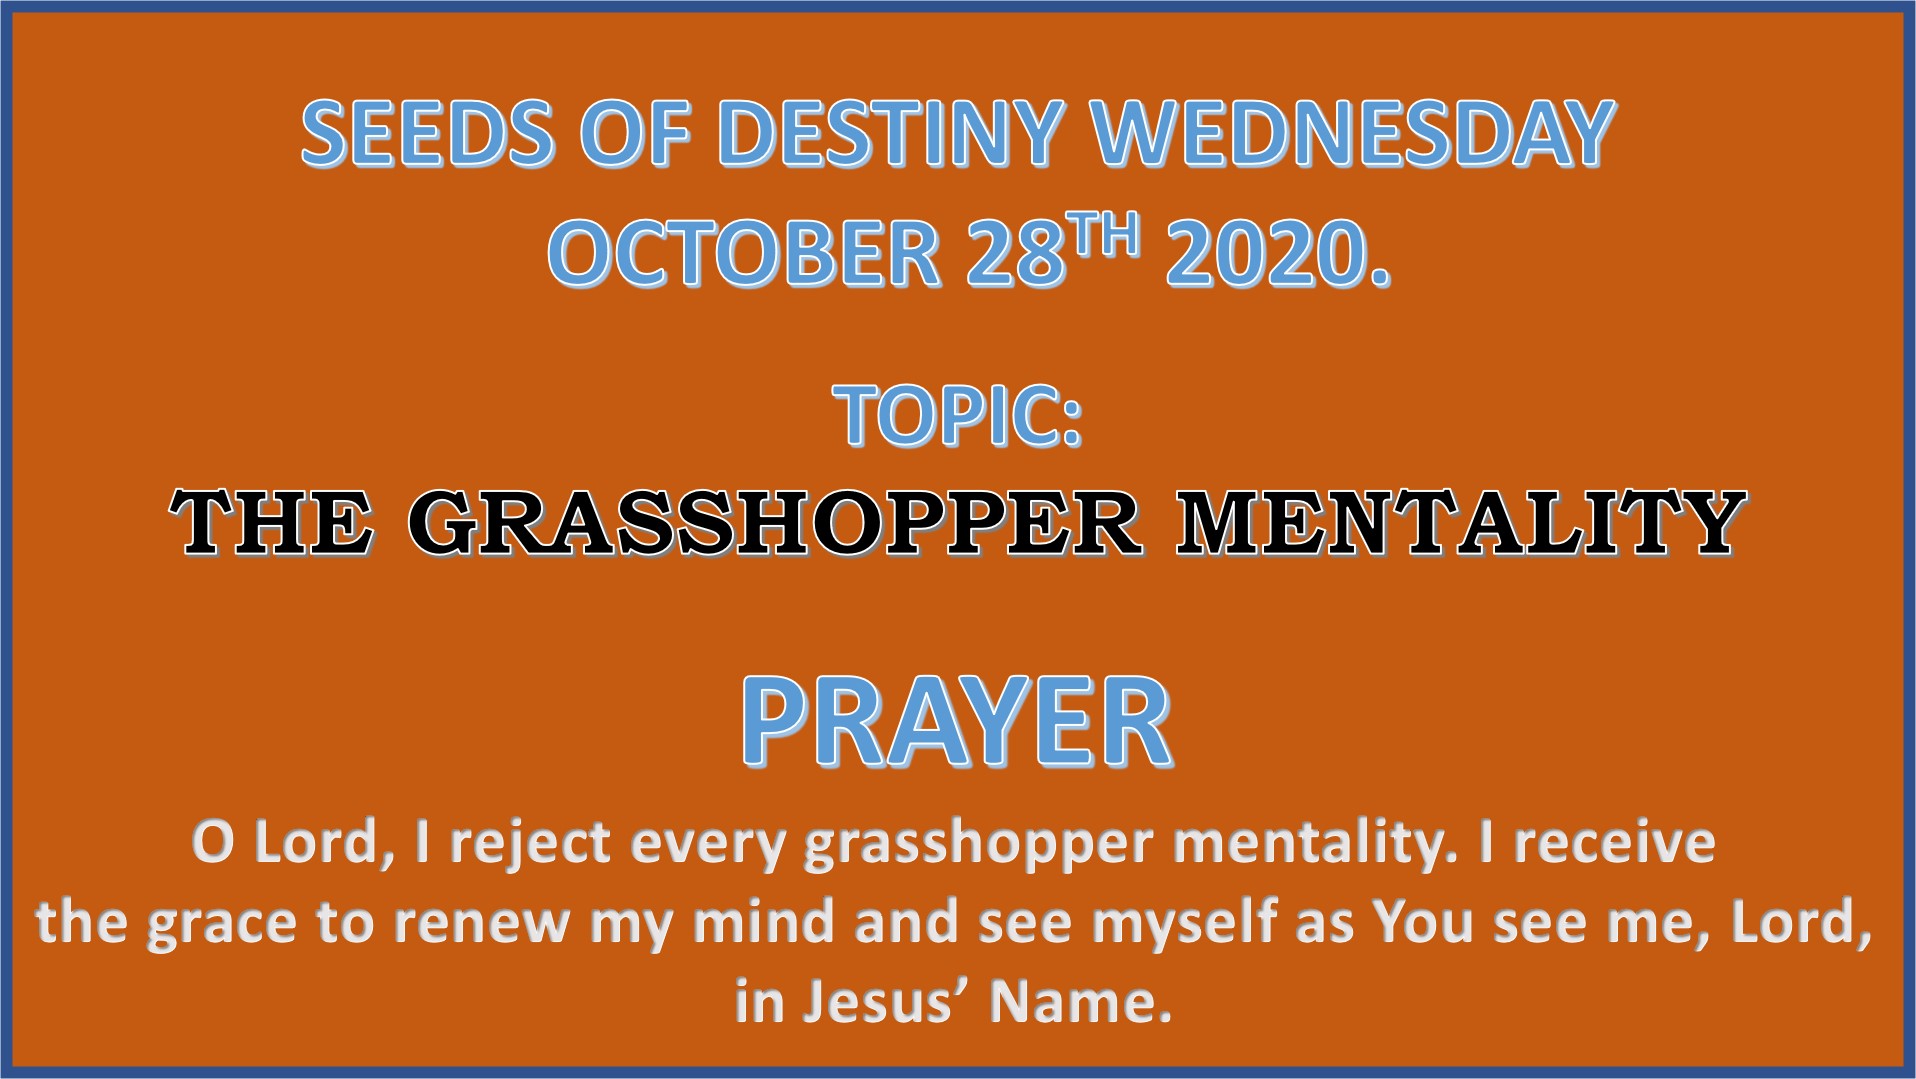 Seeds of Destiny Wednesday 28th October 2020 by Dr Paul Enenche